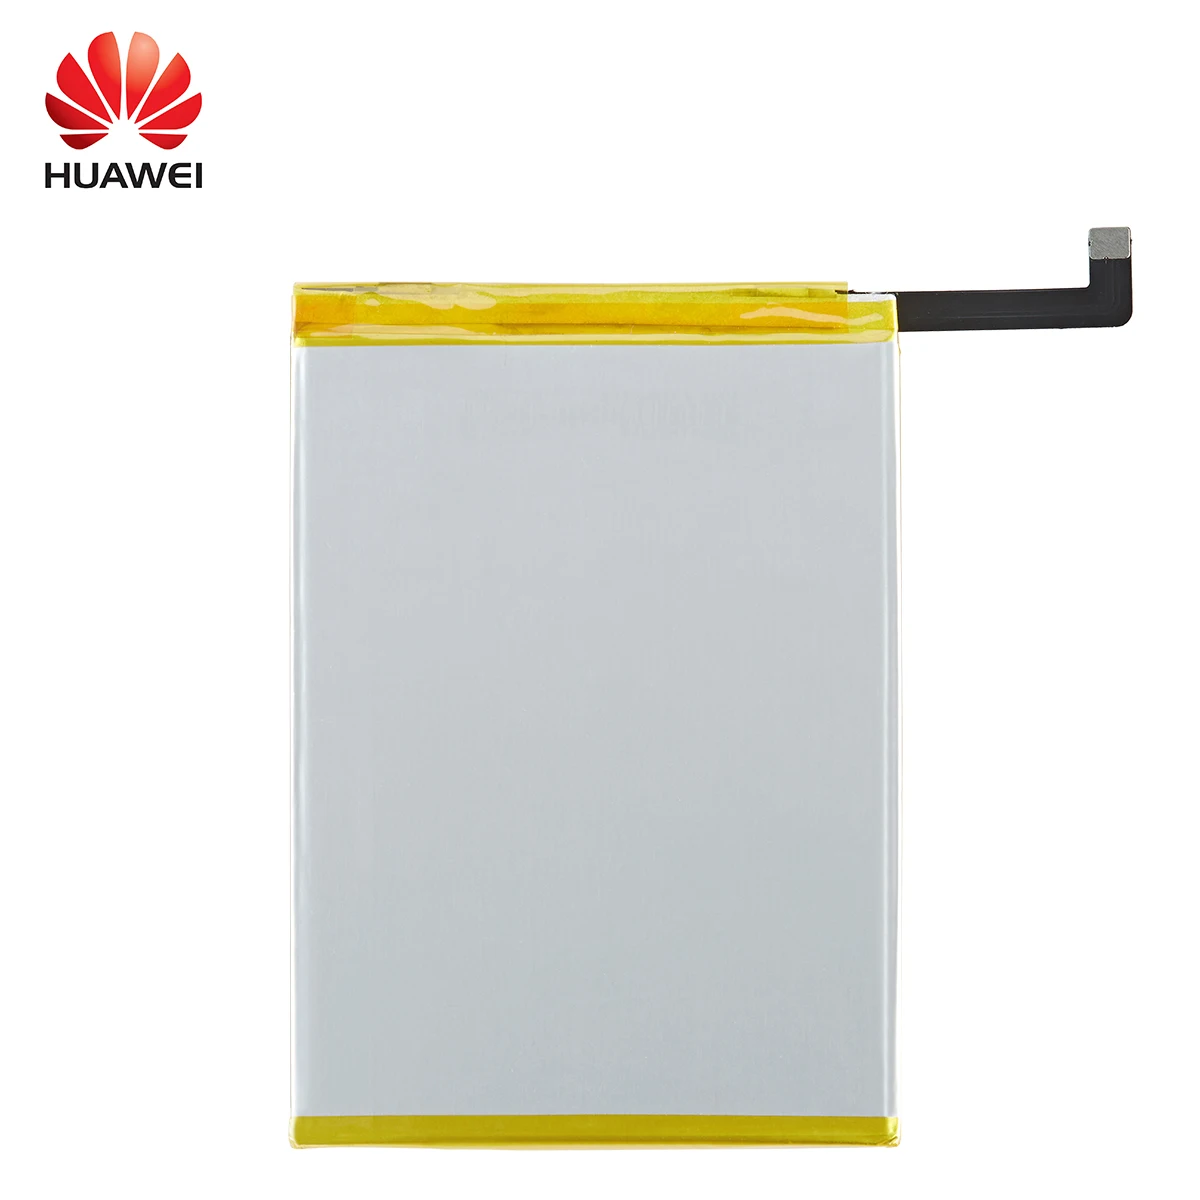 Hua Wei 100% Orginal HB3872A5ECW 4500mAh Battery For Huawei Honor Note 8 Note8 EDI-DL00 EDI-AL10 Replacement Batteries +Tools cell phone batteries